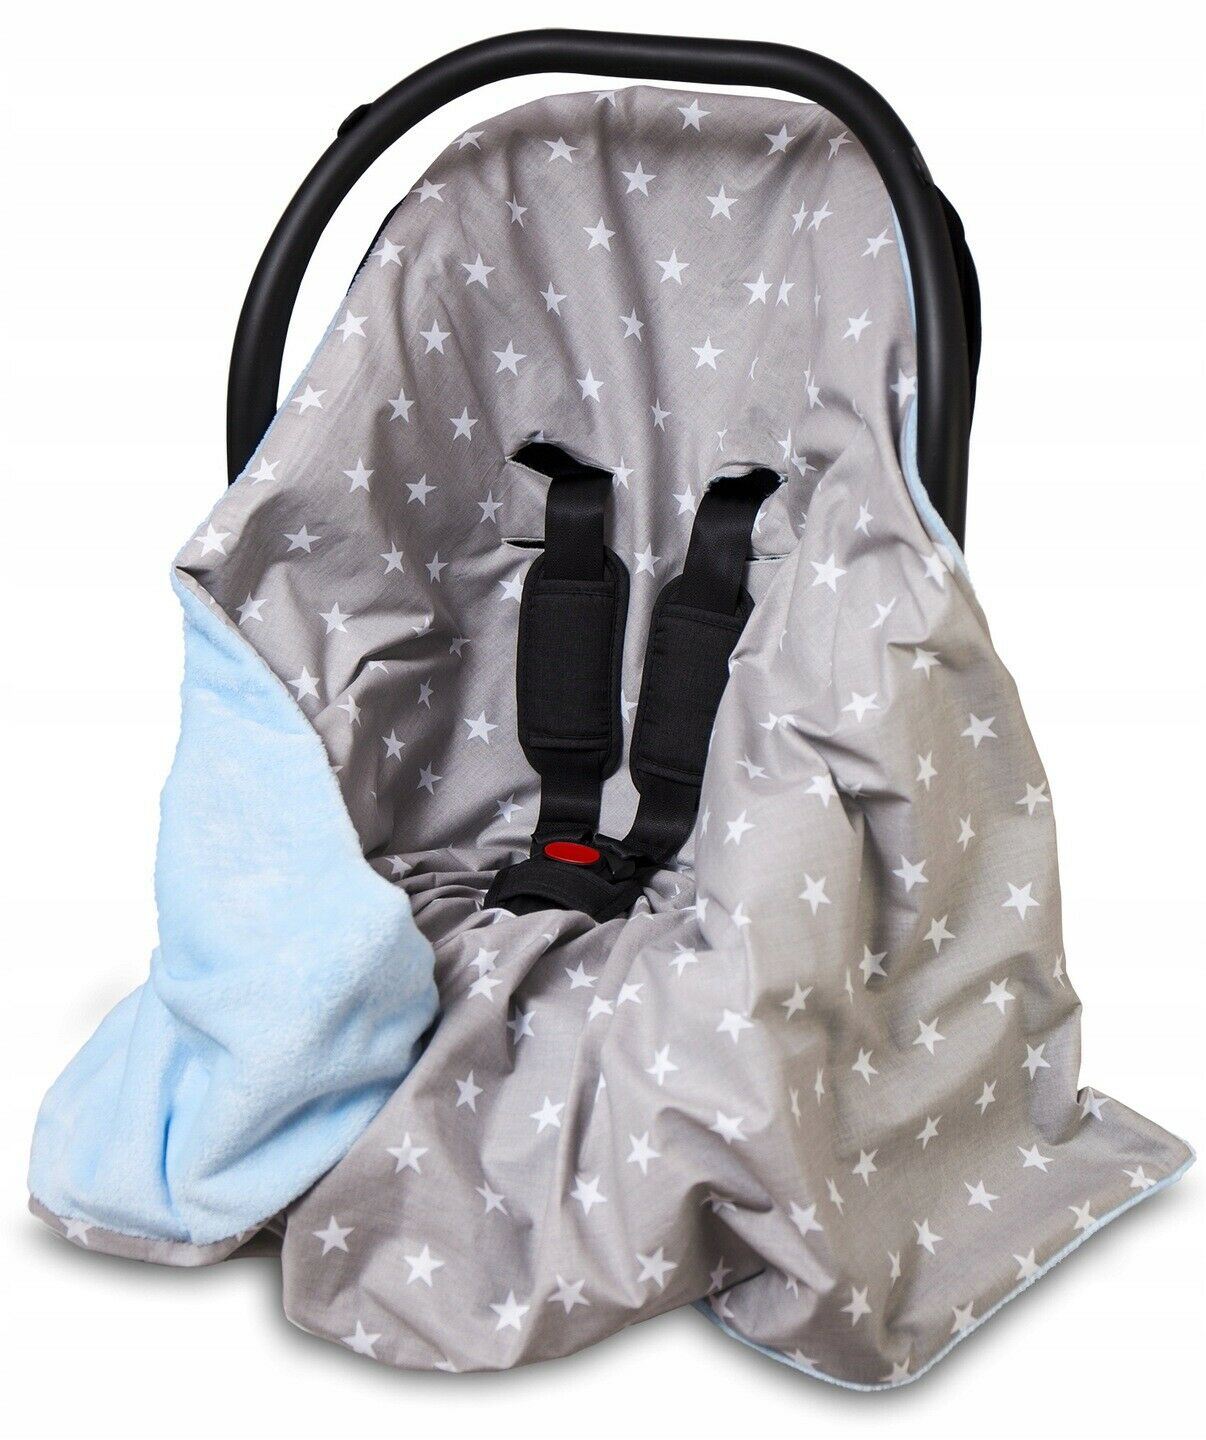 Baby Blanket Car Seat Reversible Wrap Plush Soft Double Sided Cotton 100X100cm Blue-White Stars On Grey